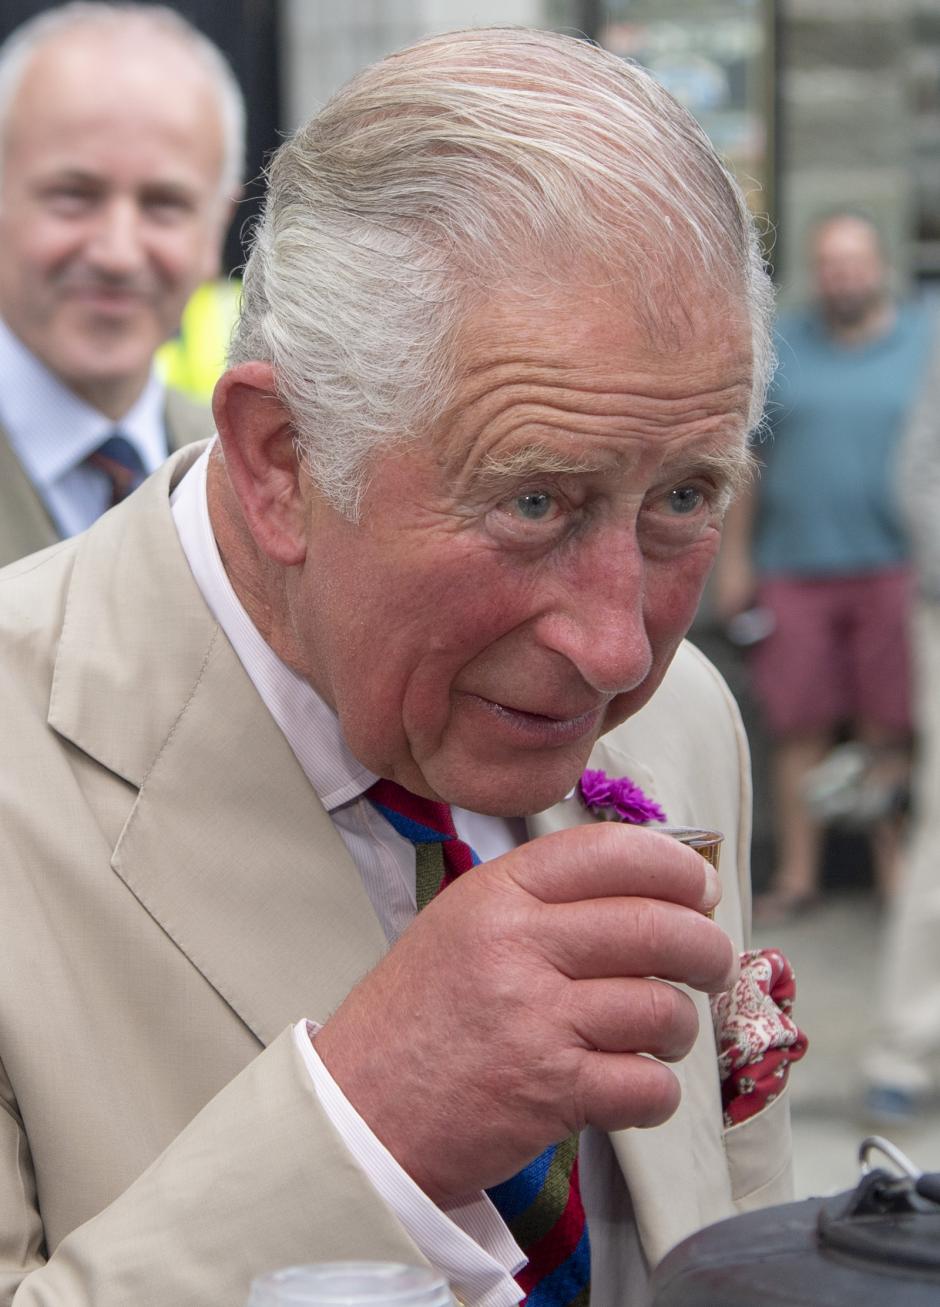 Prince Charles of Wales during their visit to Tavistock, Devon, to celebrate the town's recent restoration to its historic buildings and attend the town's Community Festival of Food and Crafts, as part of their visit to Devon. *** Local Caption *** .